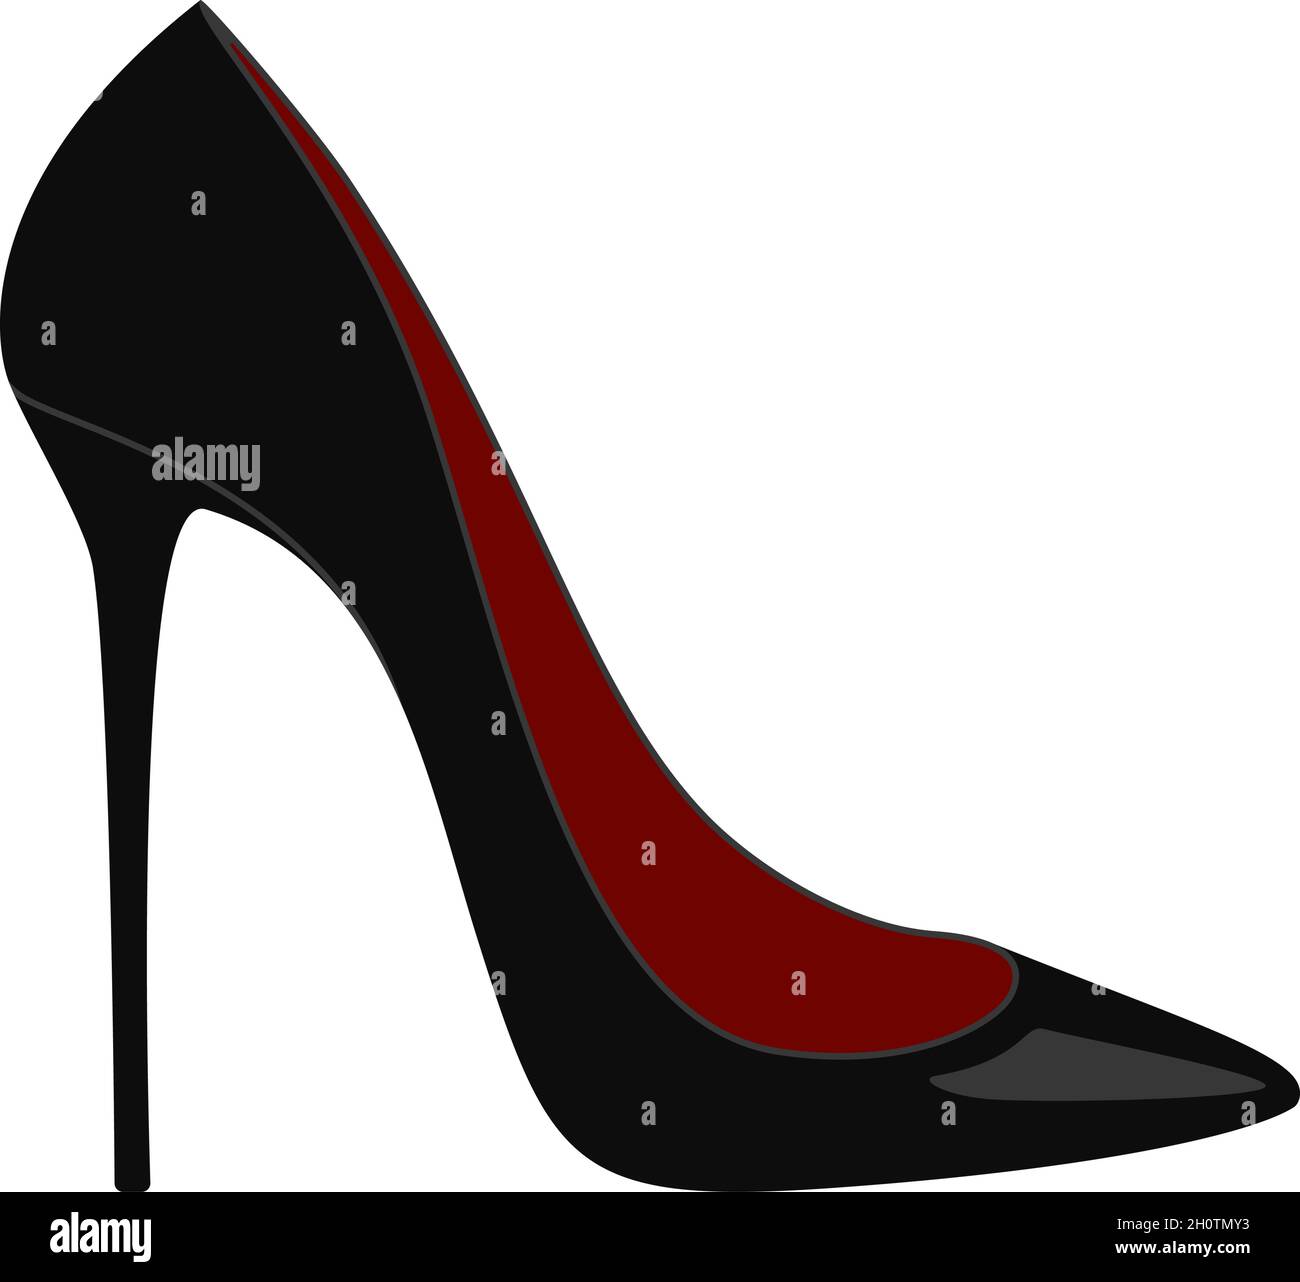 Elegant high heel shoe or stiletto in black and red vector icon Stock Vector